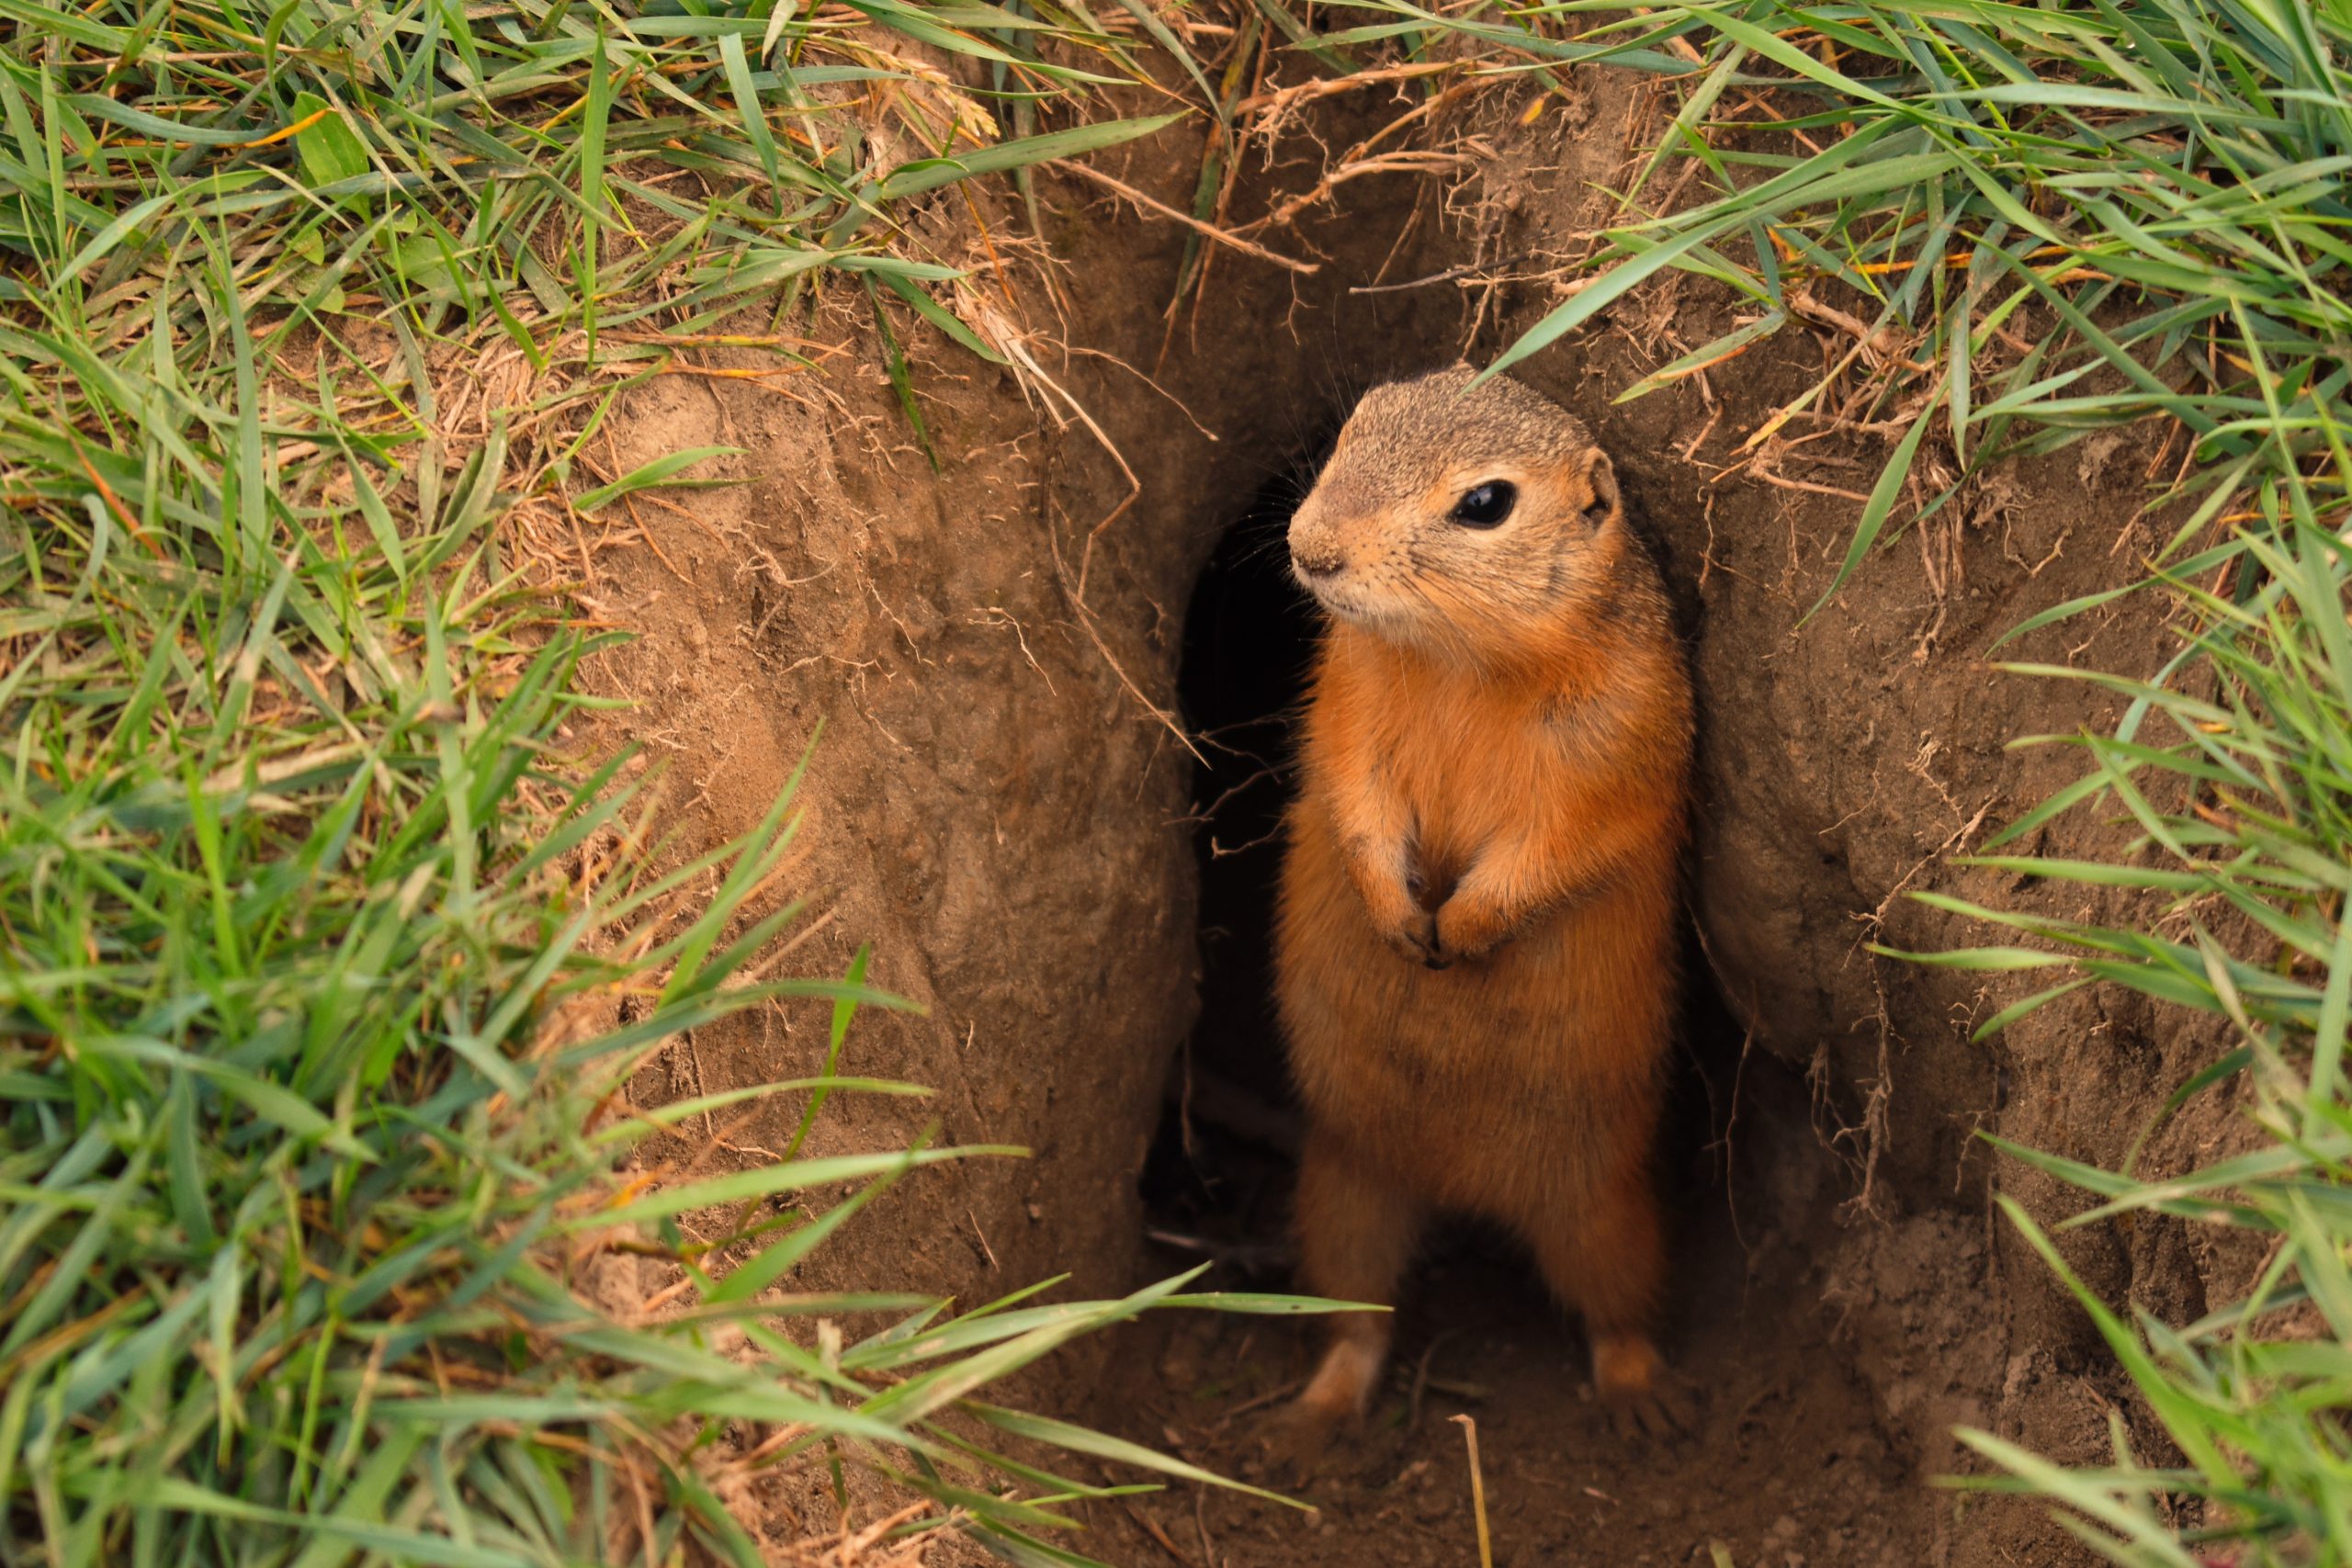 Best way to prevent gophers from coming to your yard